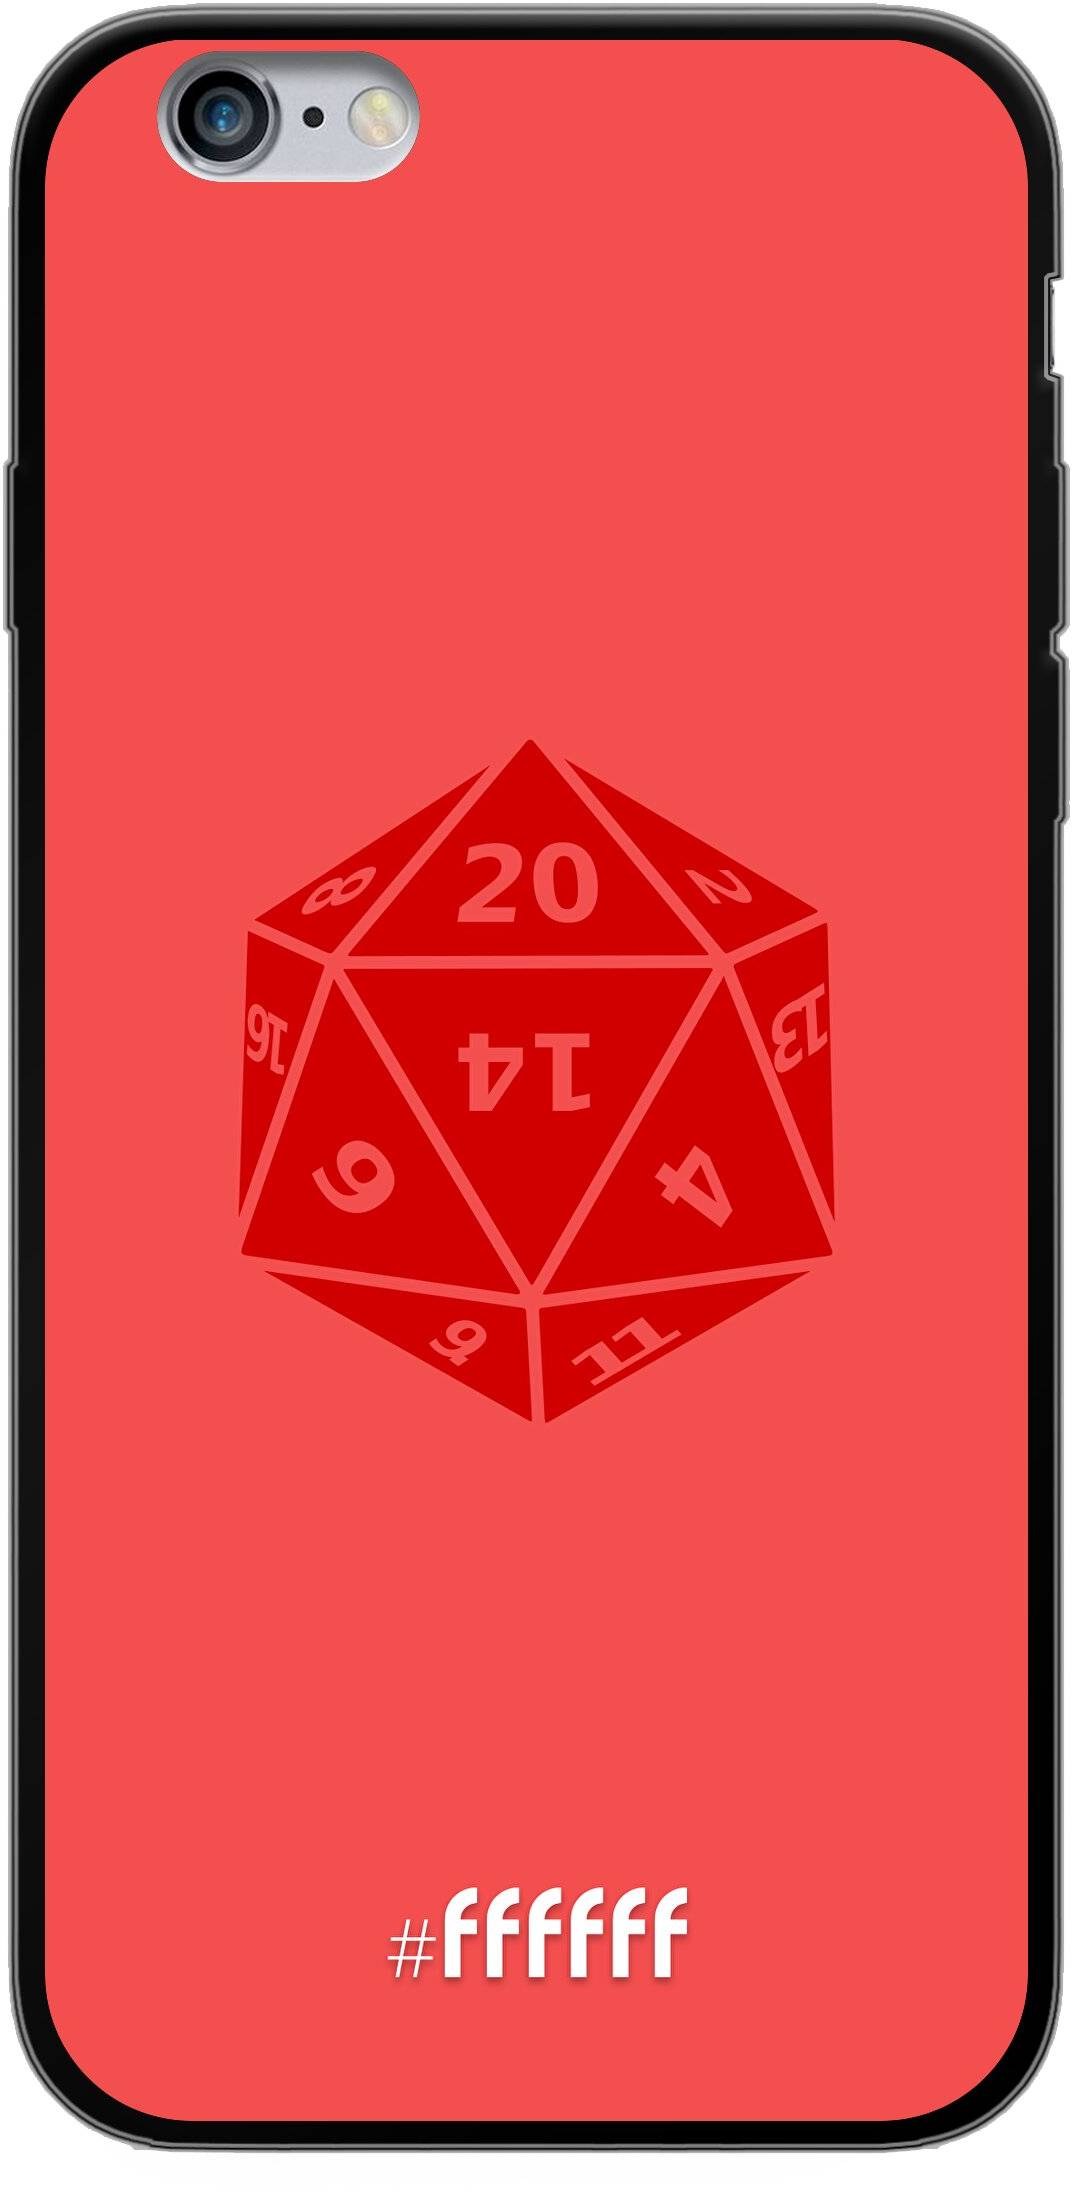 D20 - Red iPhone 6